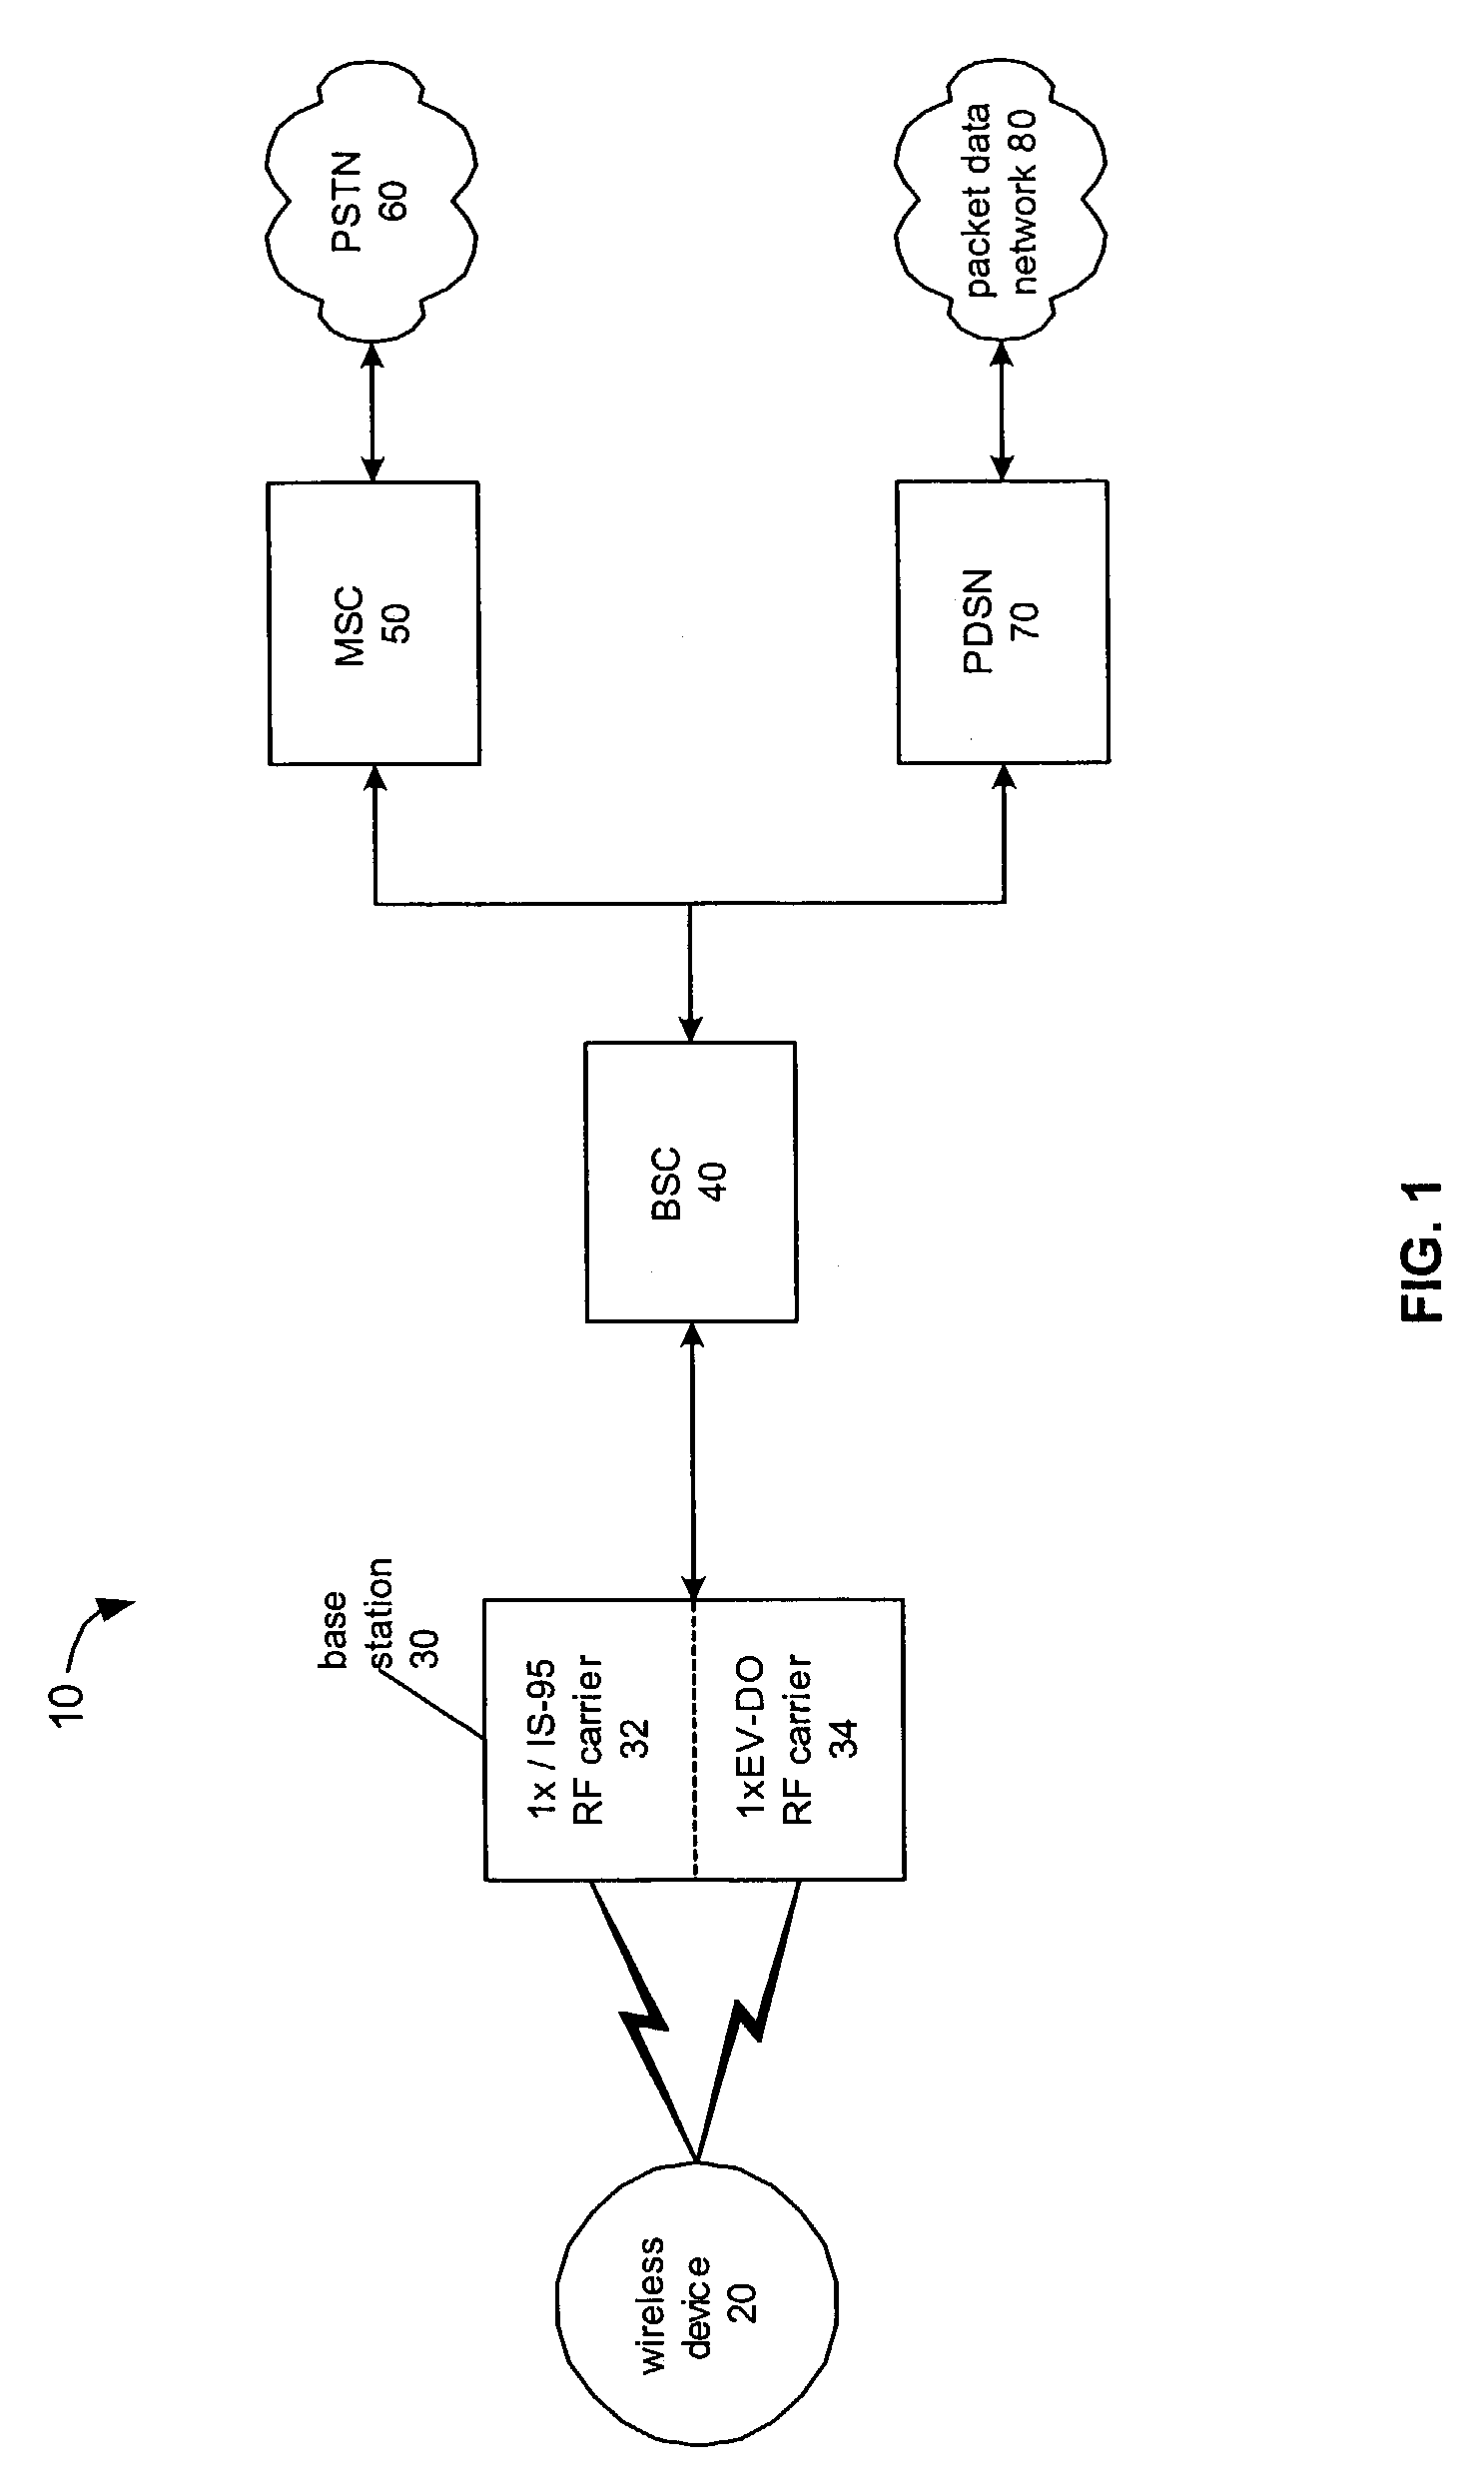 Method for determining packet transmission system availability for packet data call origination during hybrid operation